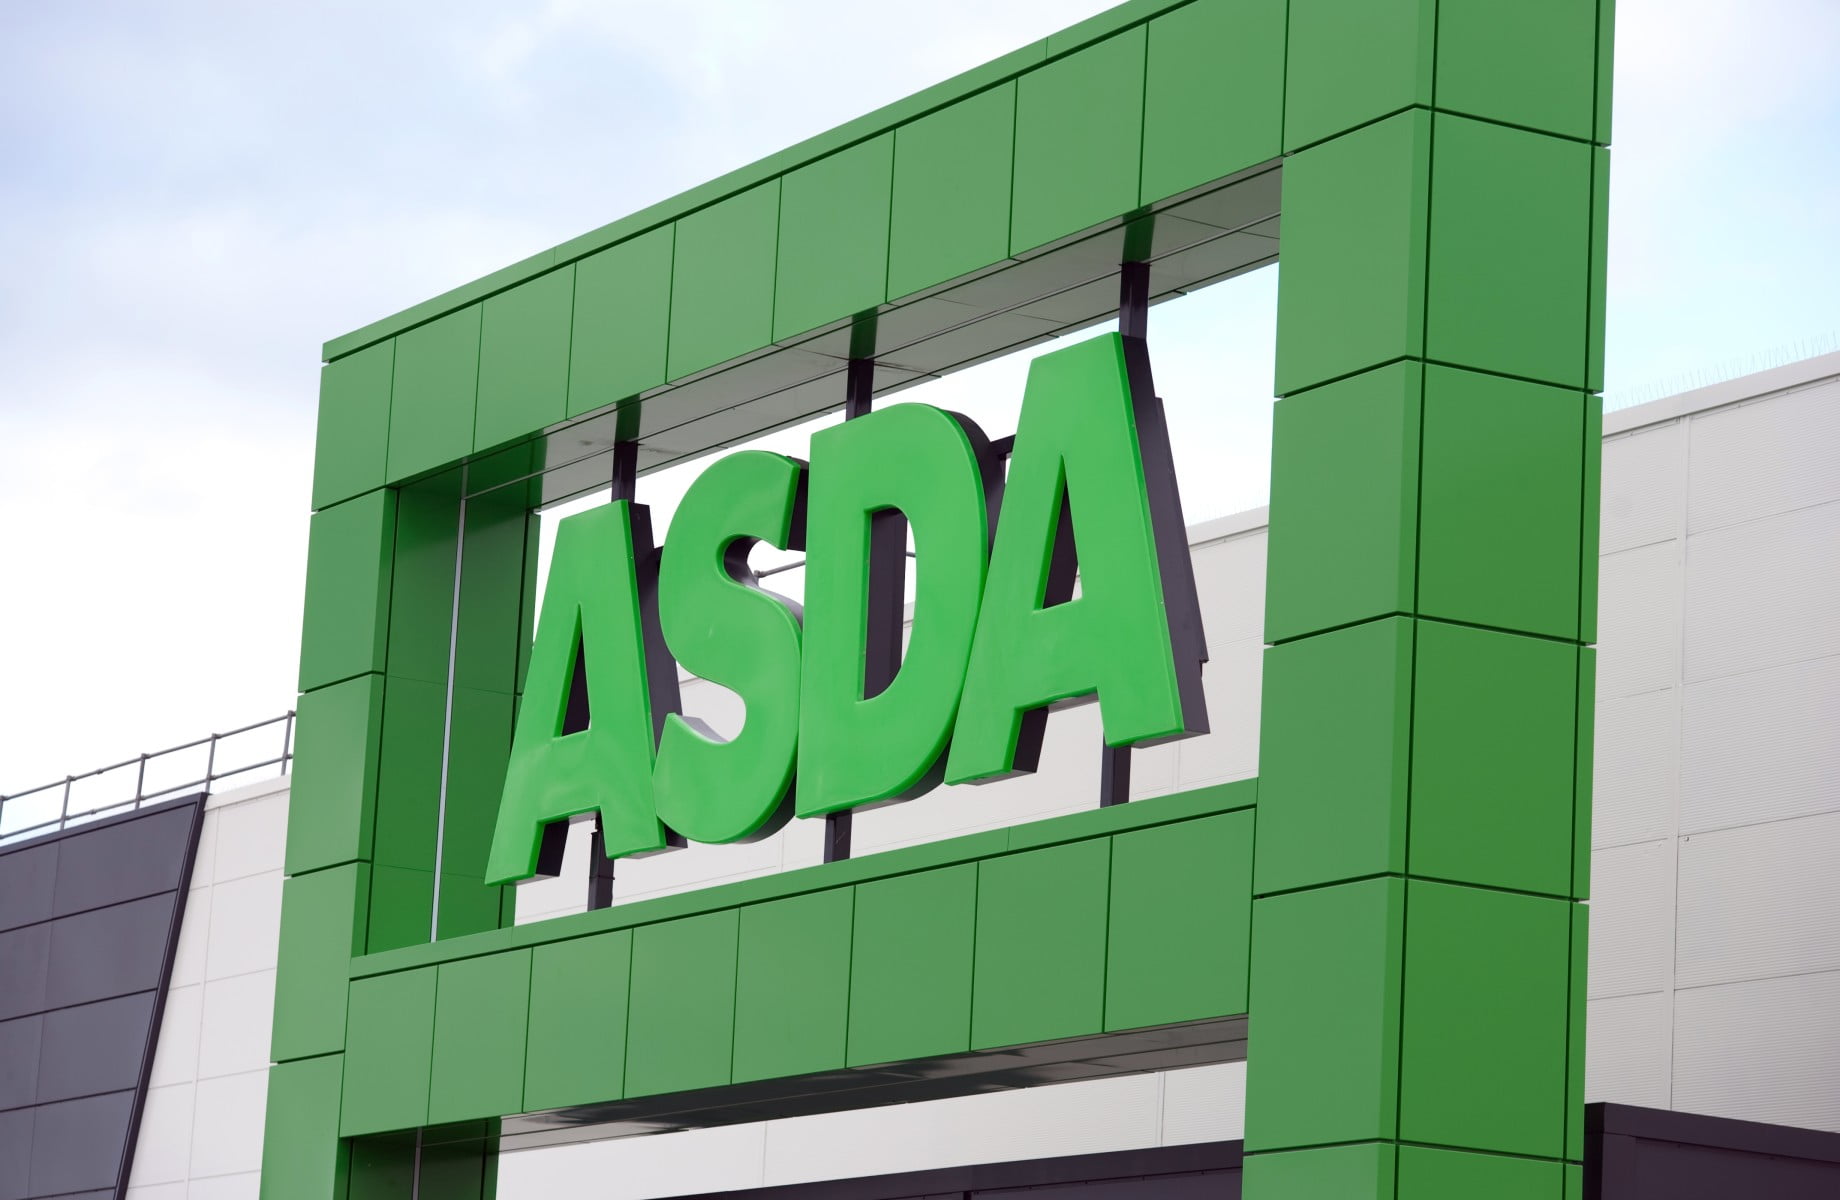 Asda has declared that it will maintain its discount of 10% for first responders who present their Blue Light Cards until at least the 31st of March 2023.